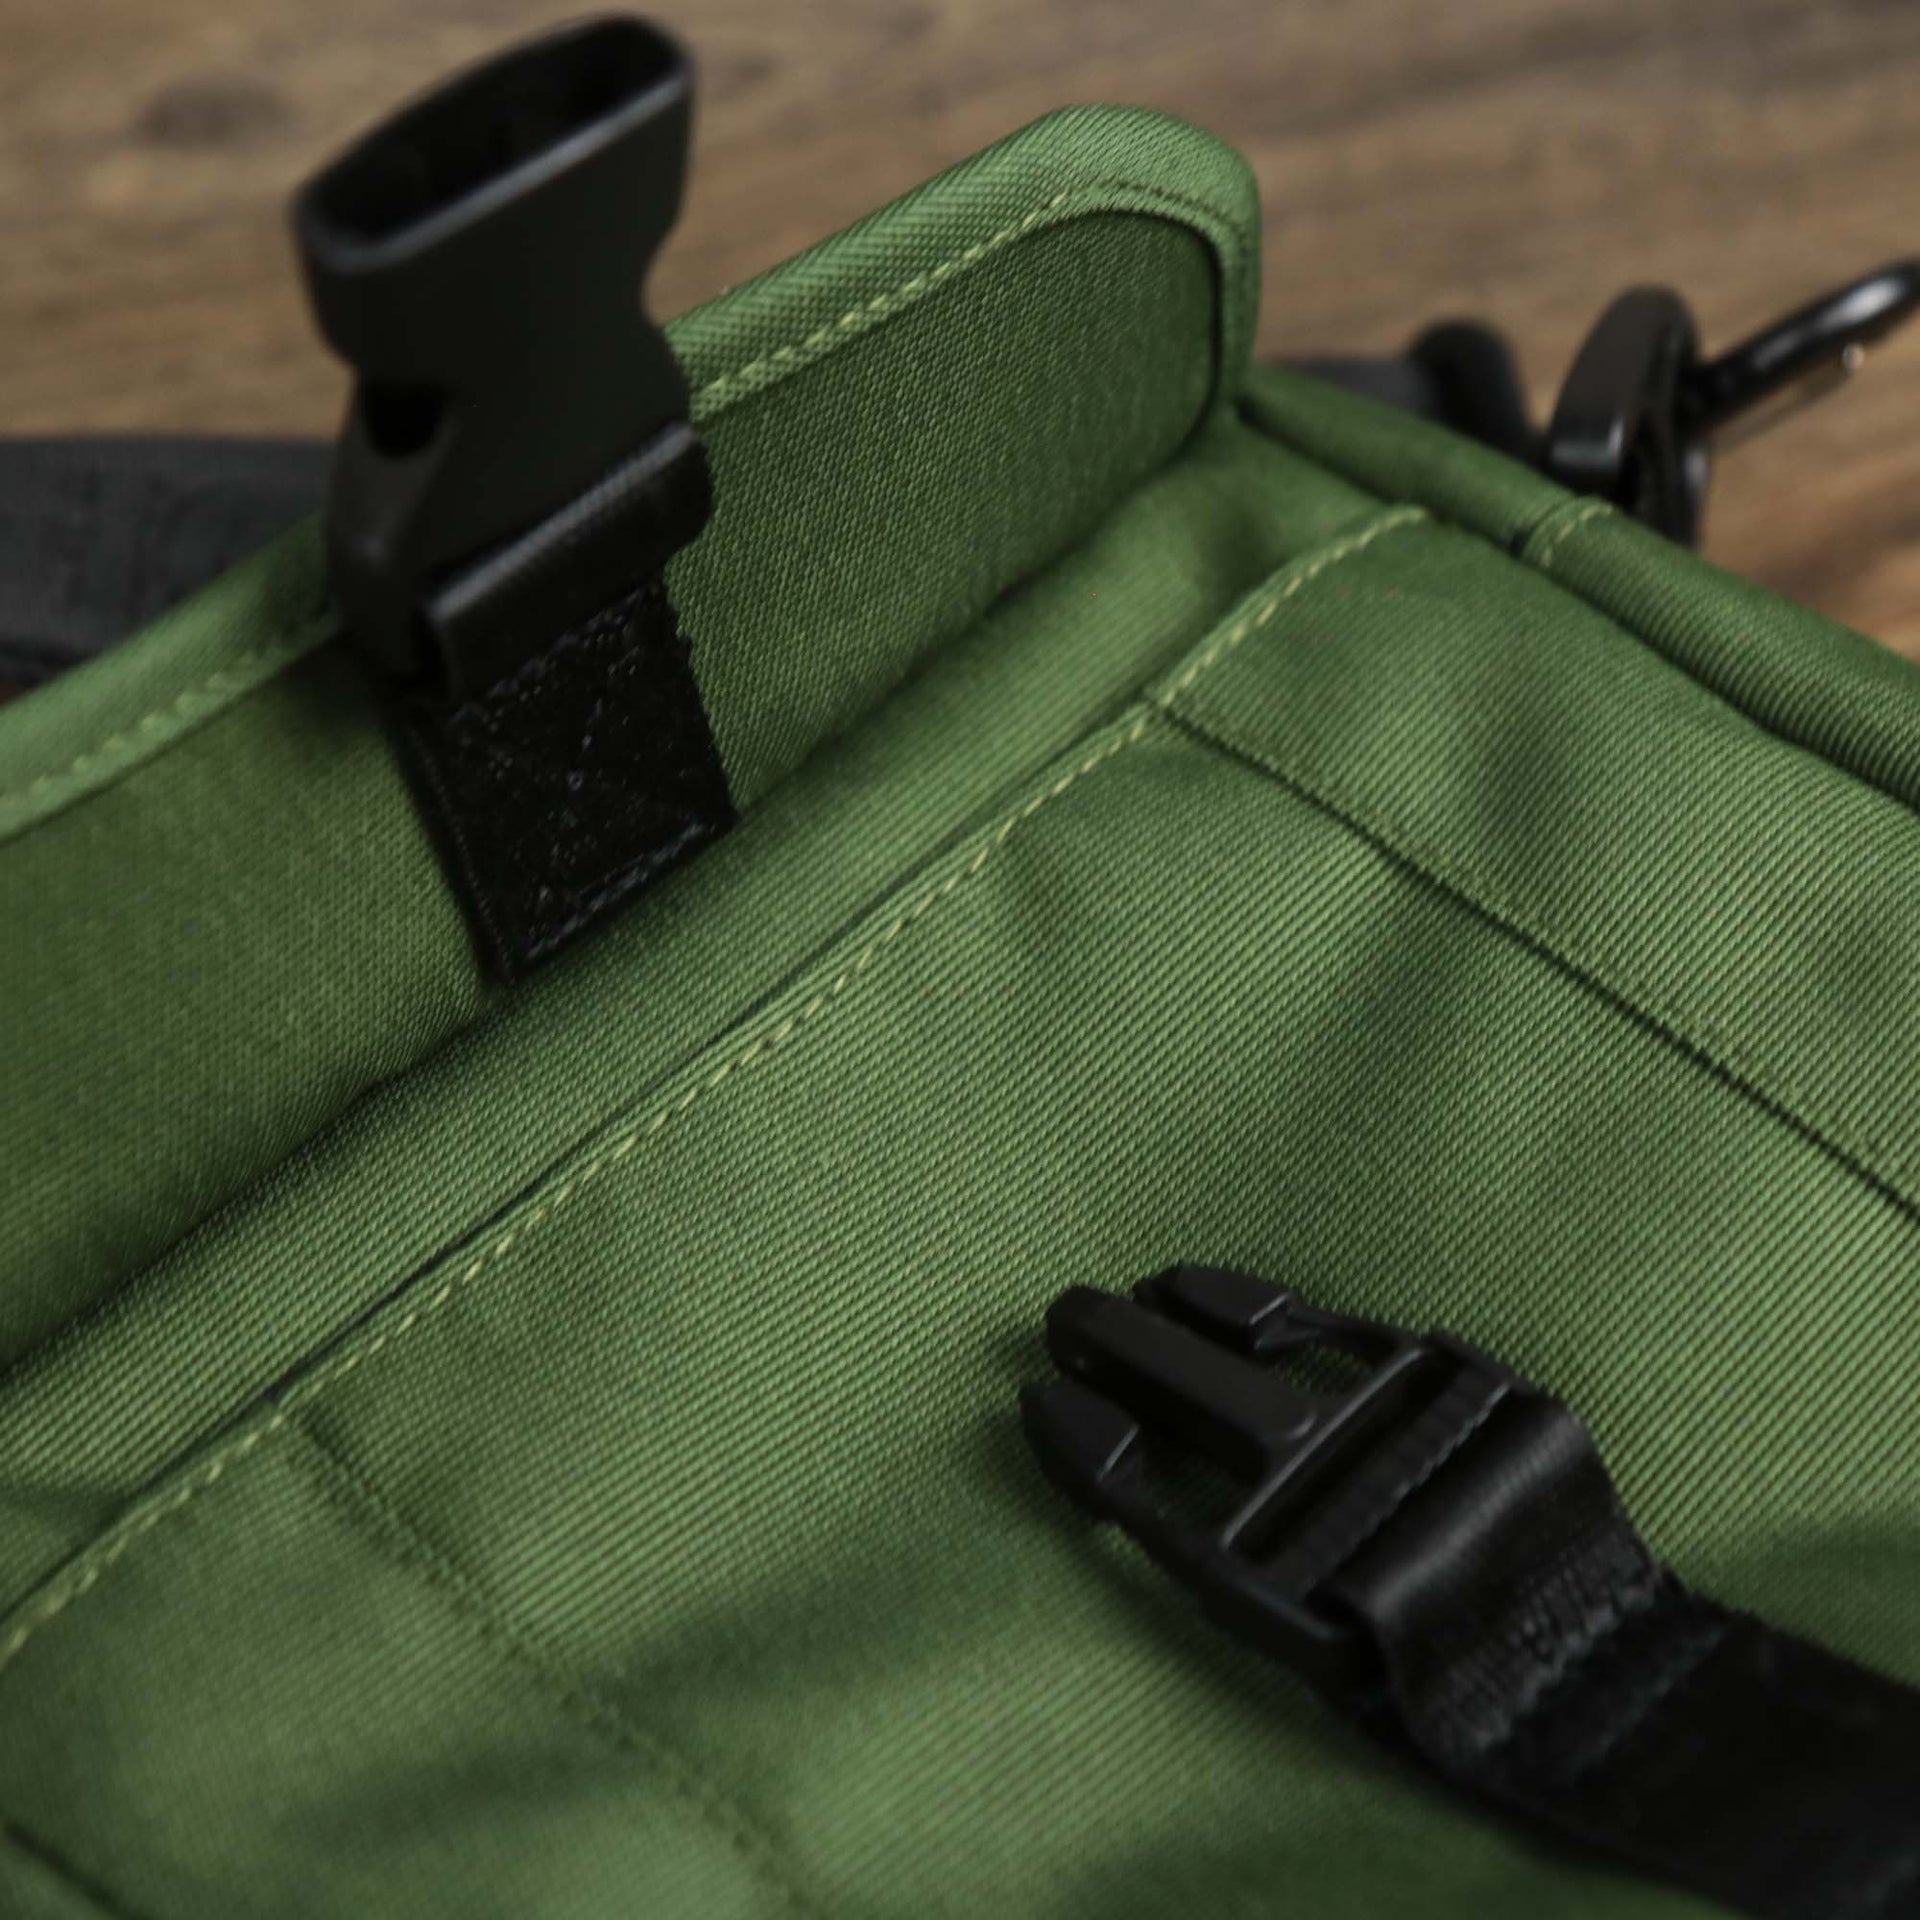 The clasp open on the Essential Nylon Shoulder Bag Streetwear with Mesh Pocket | Official Olive